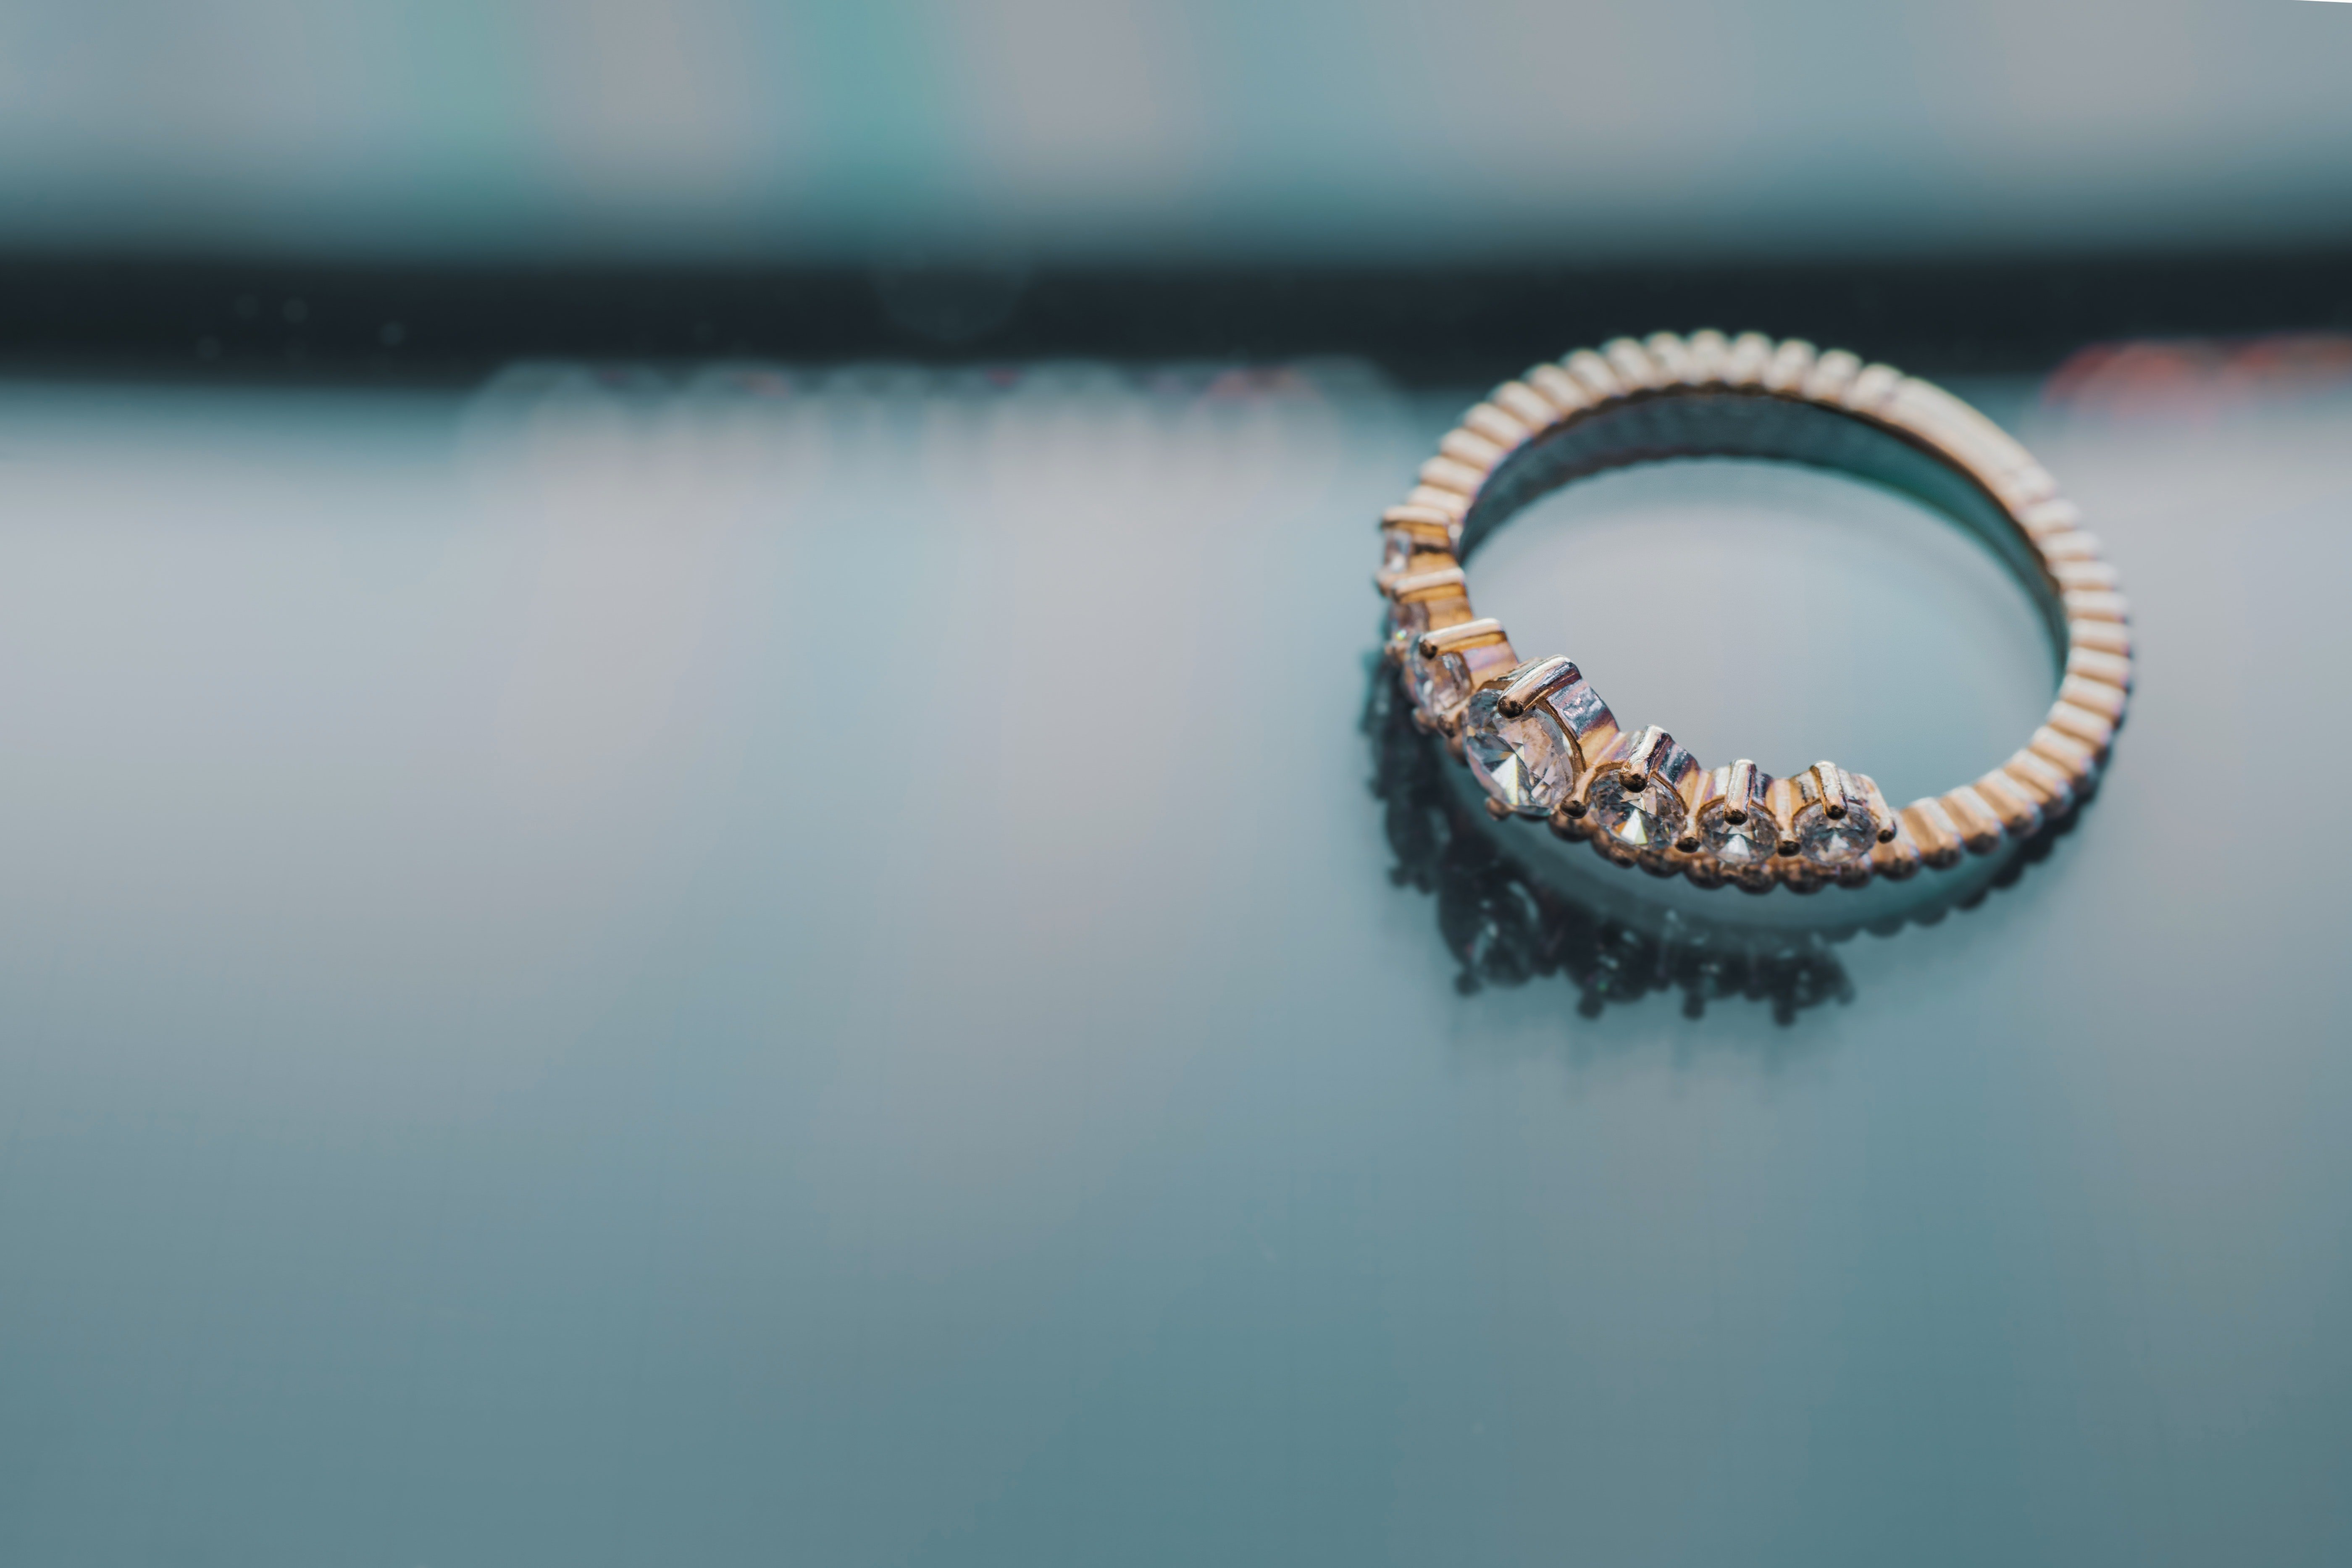  An engagement ring | Source: Pexels